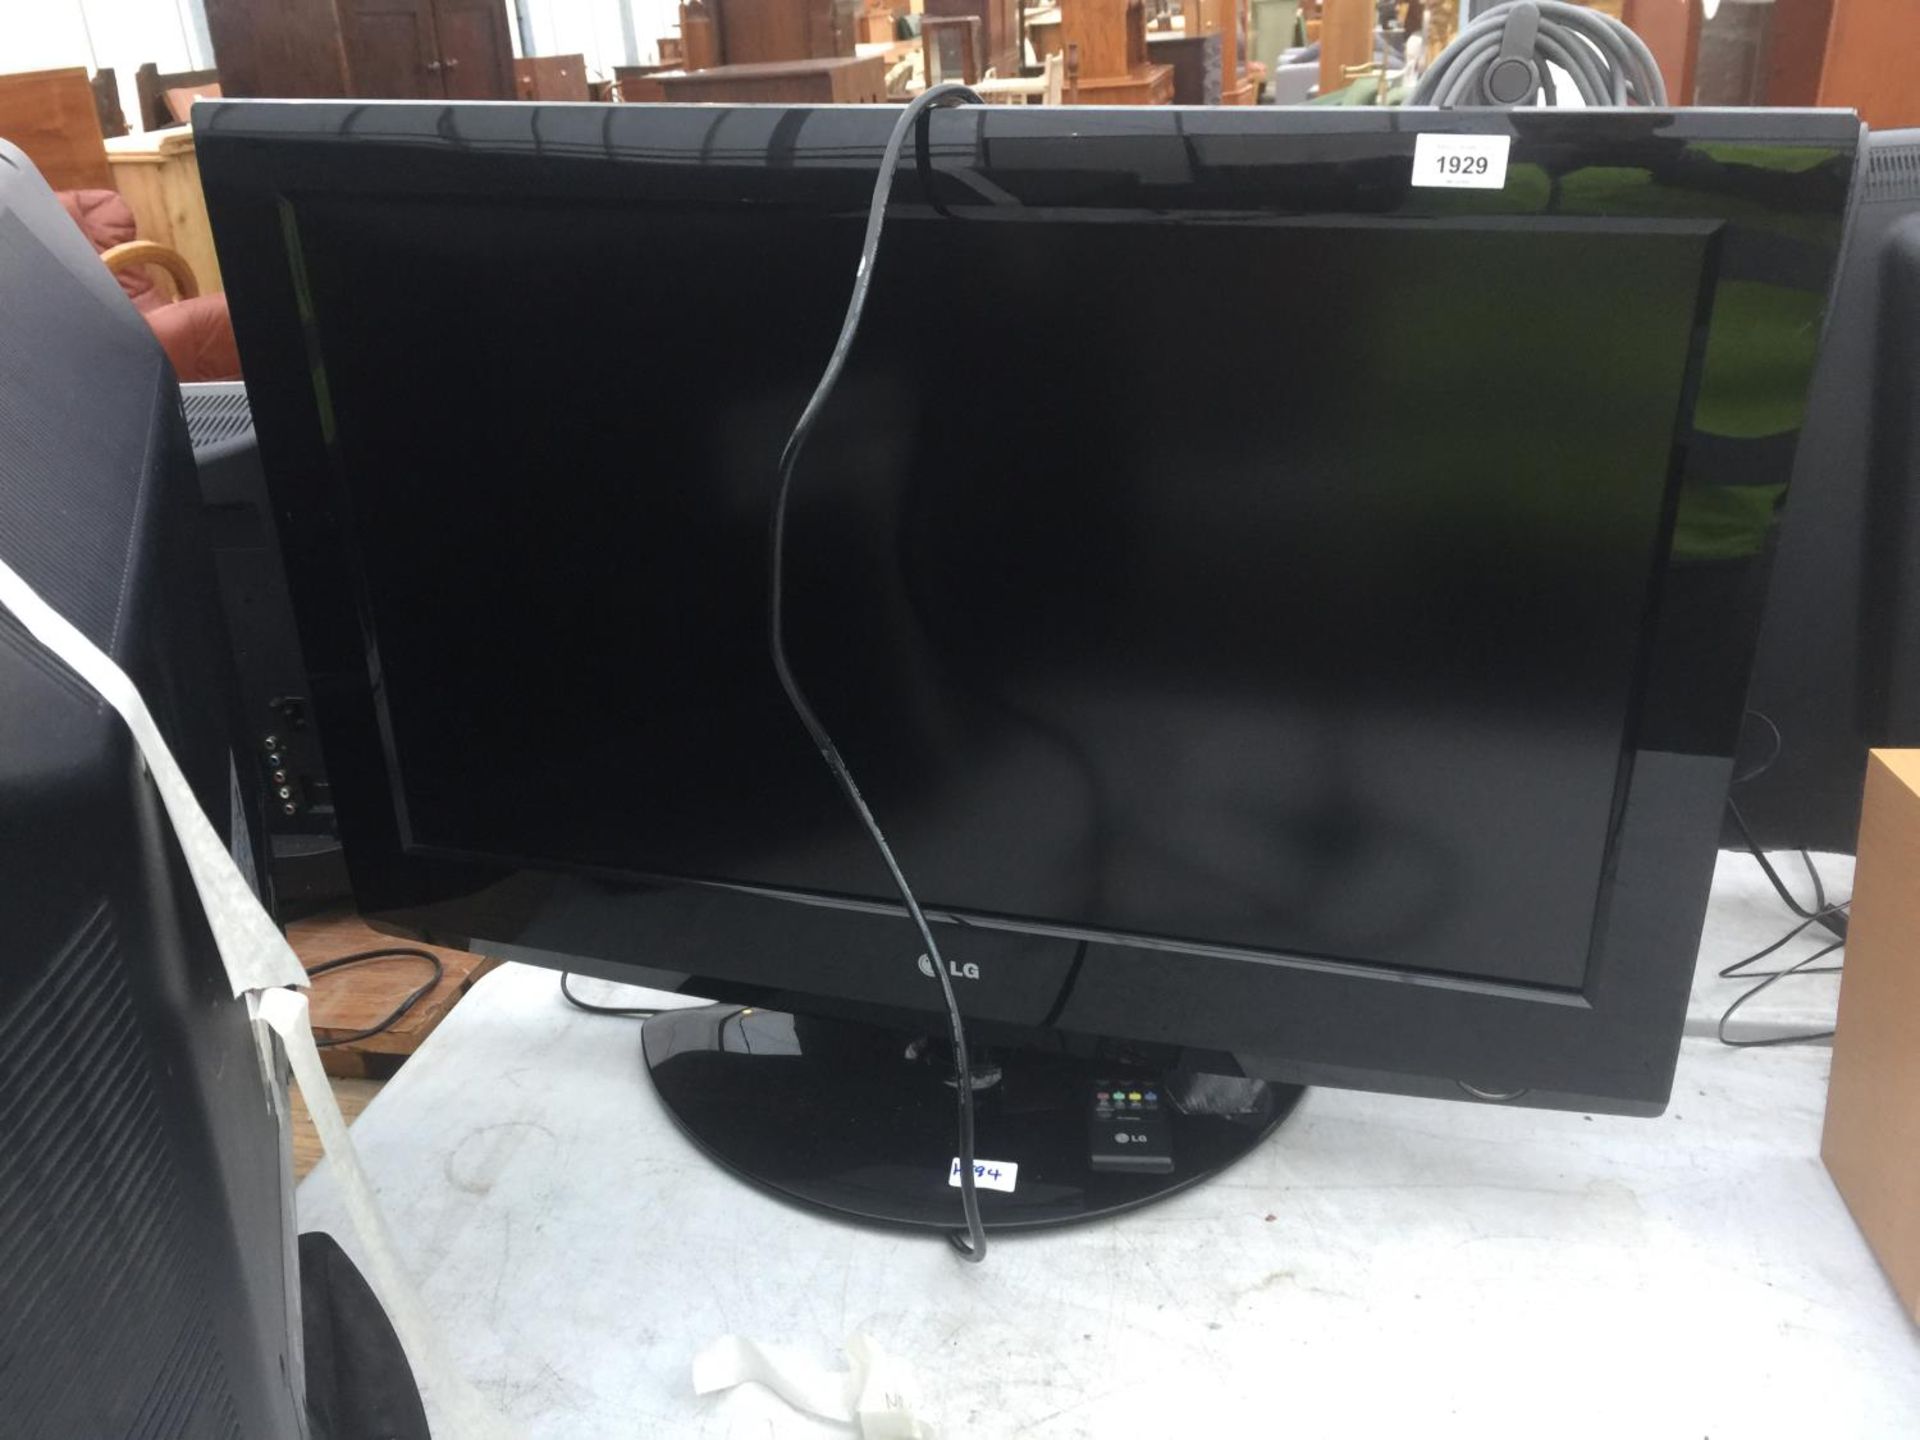 A 32" LG TELEVISION WITH REMOTE CONTROL